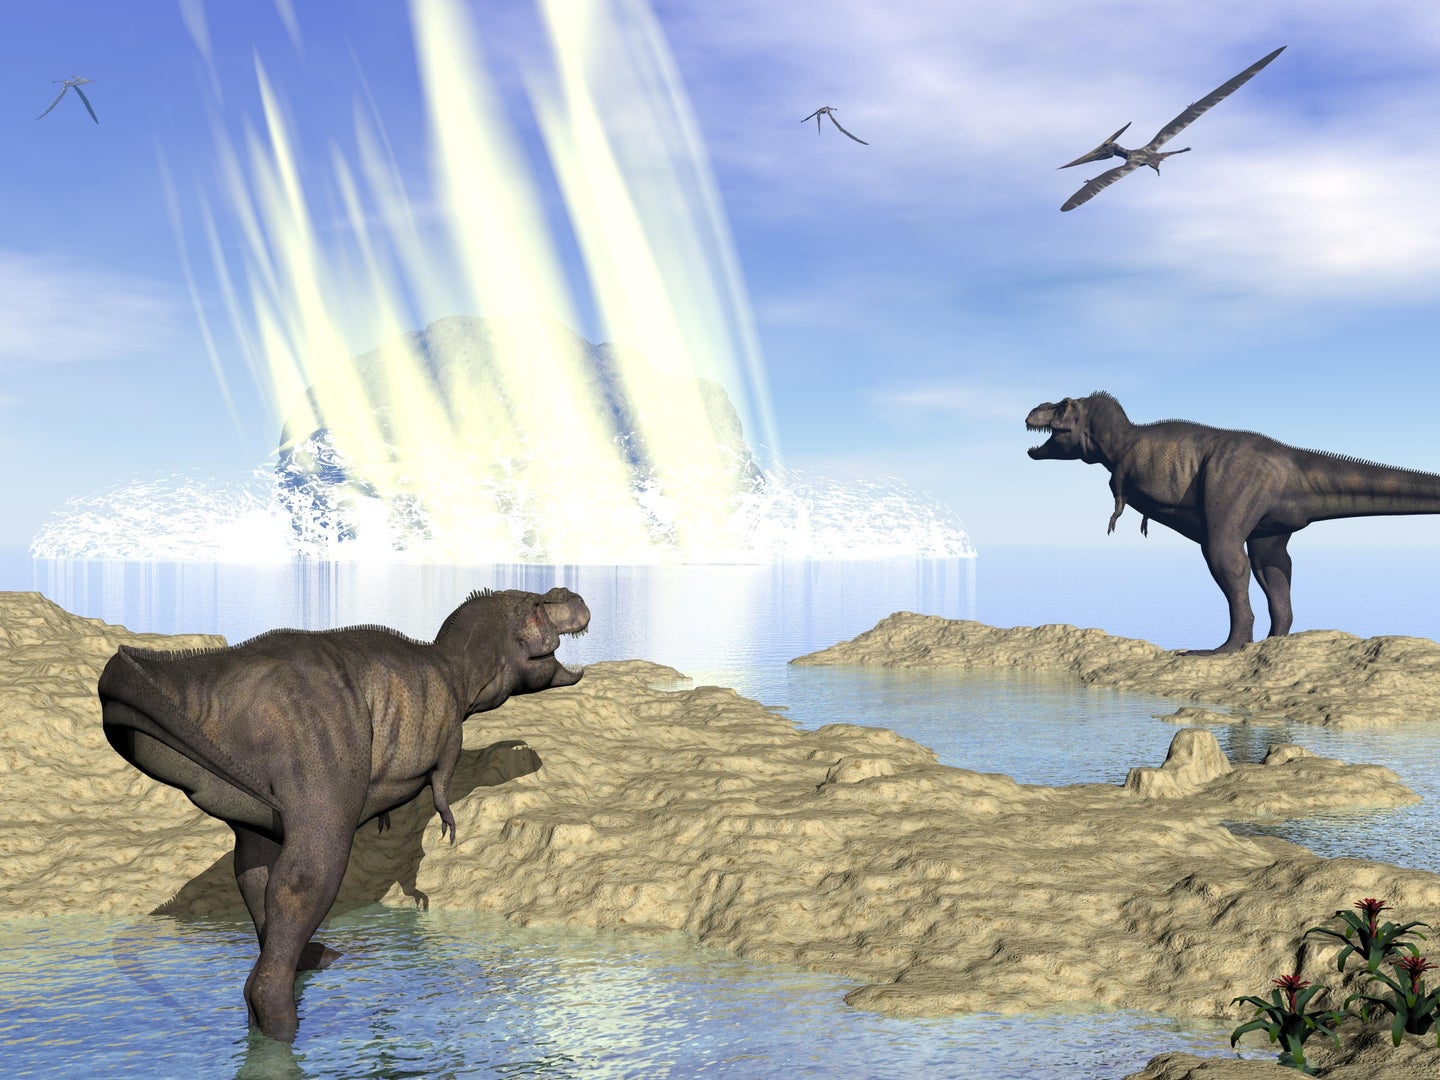 An illustration of the asteroid that wiped out the dinosaurs.